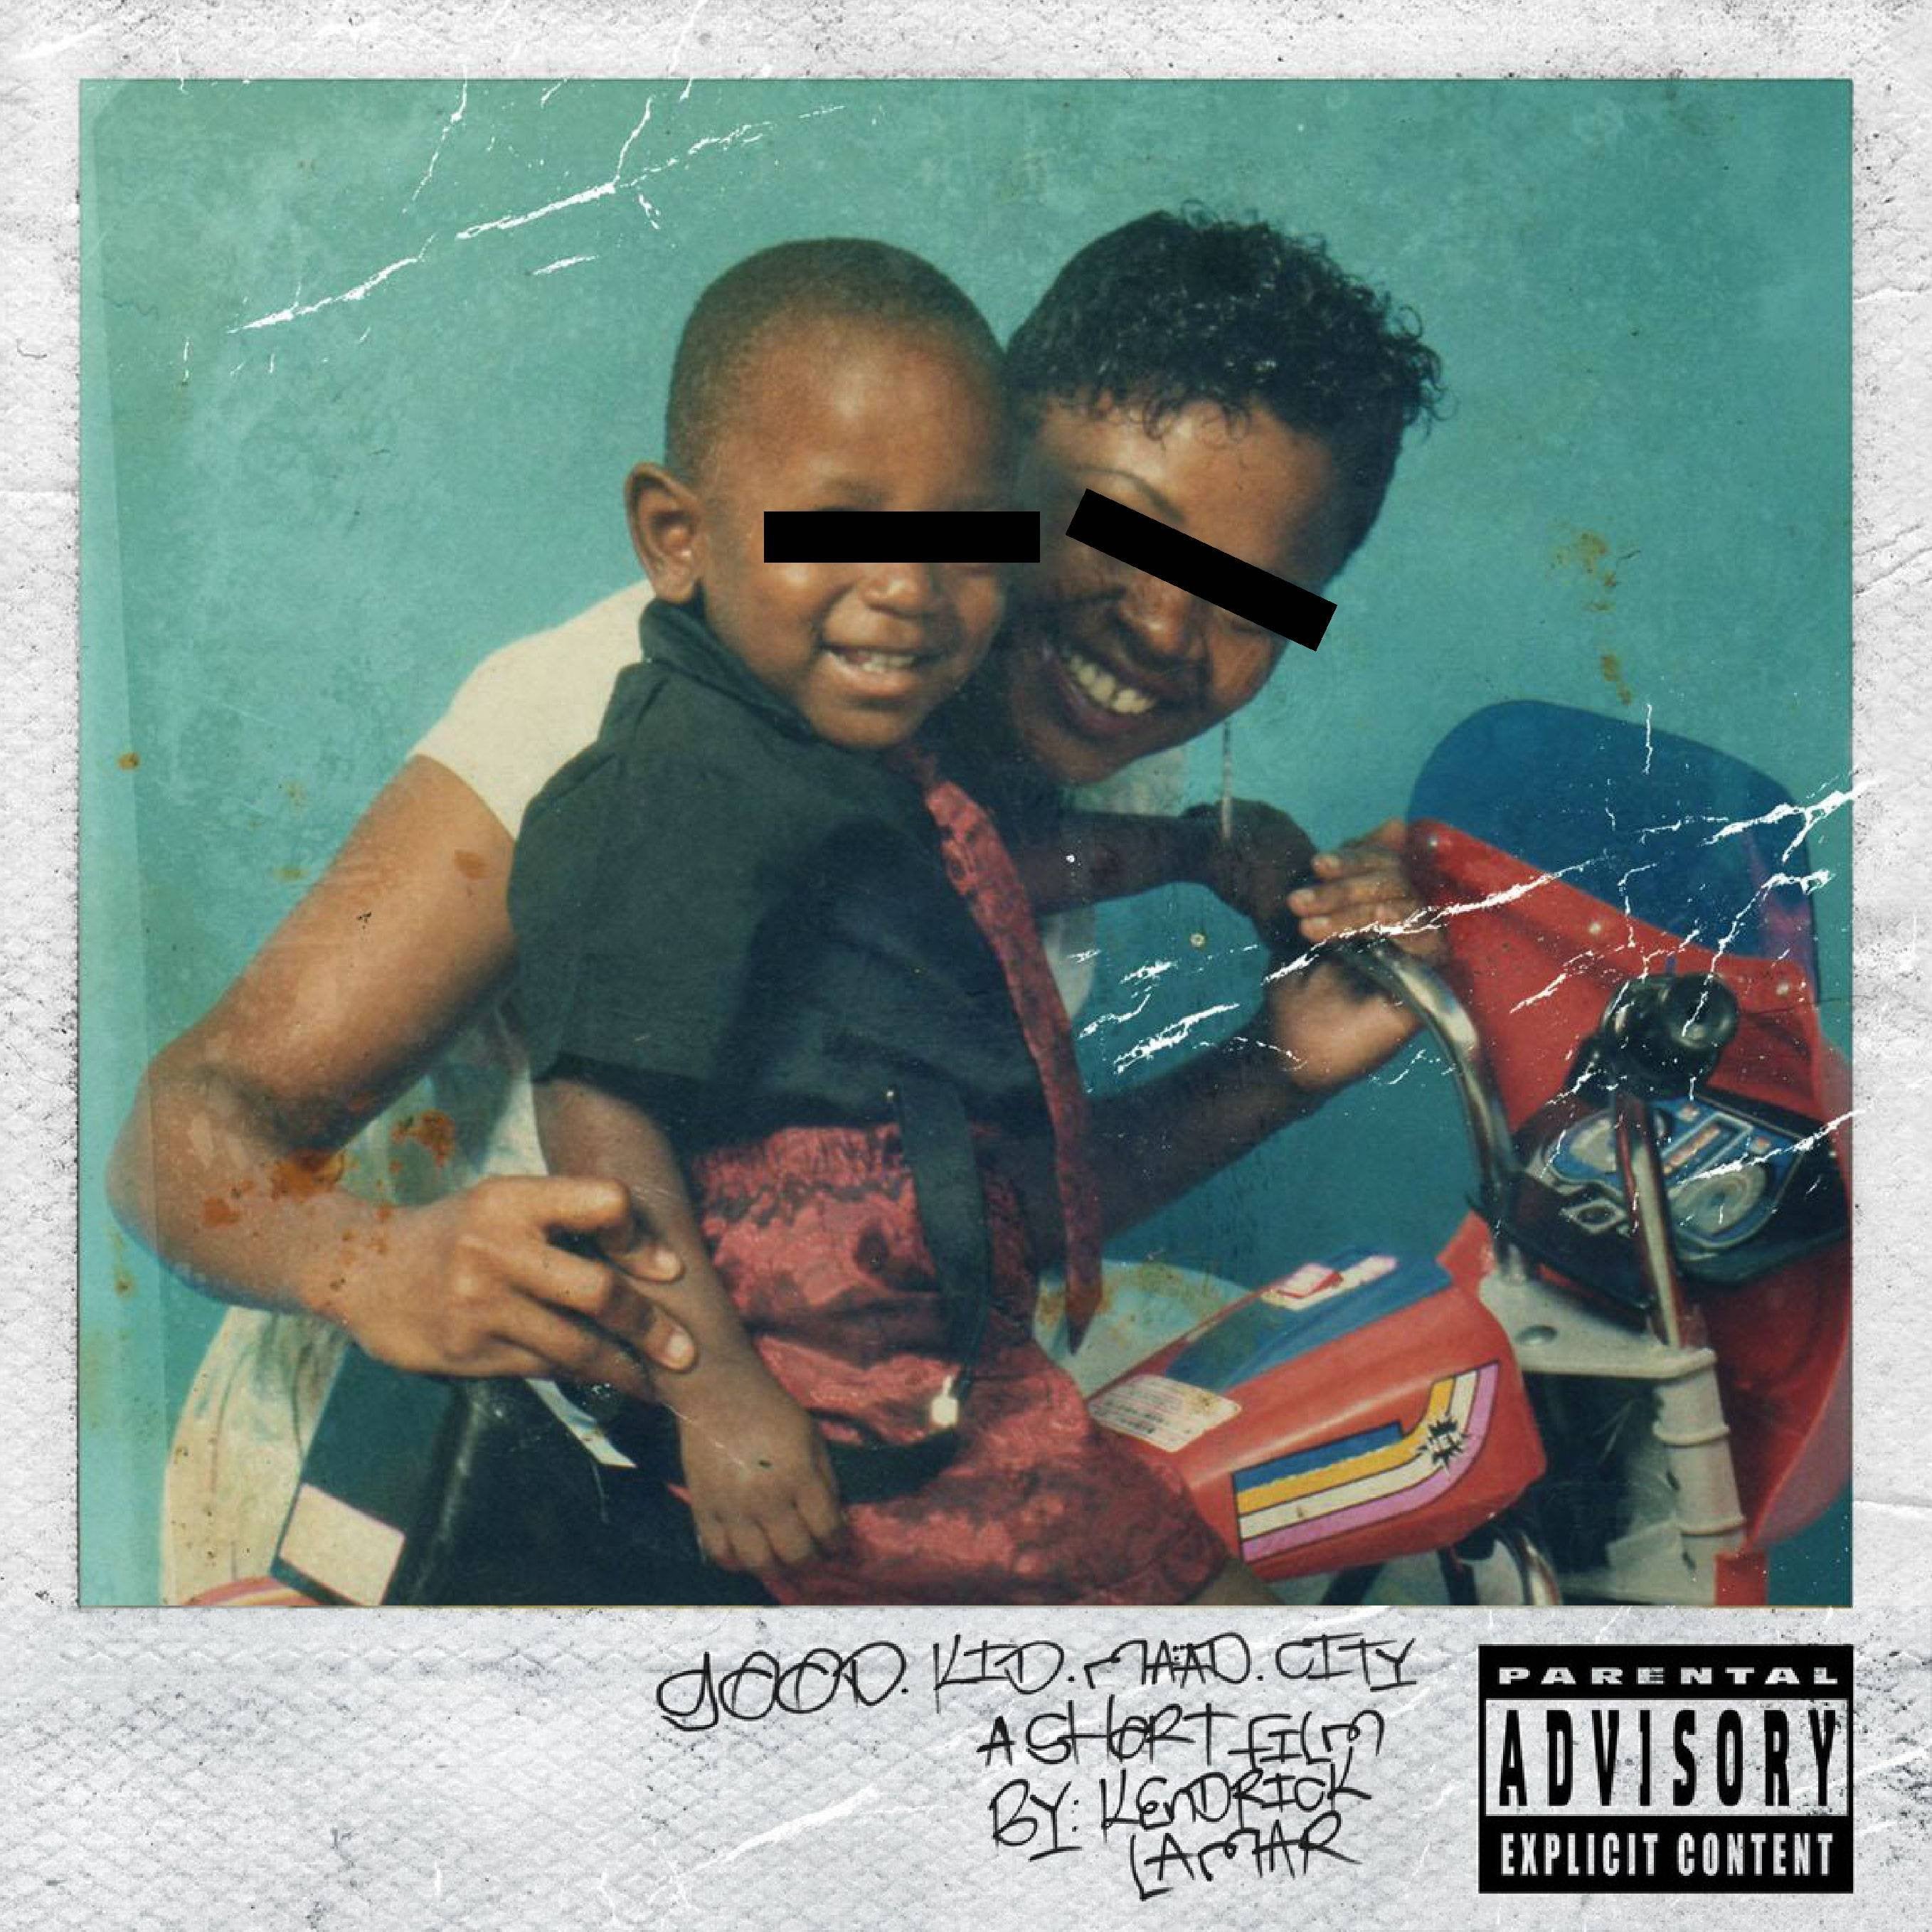 good kid maad city deluxe album cover meaning